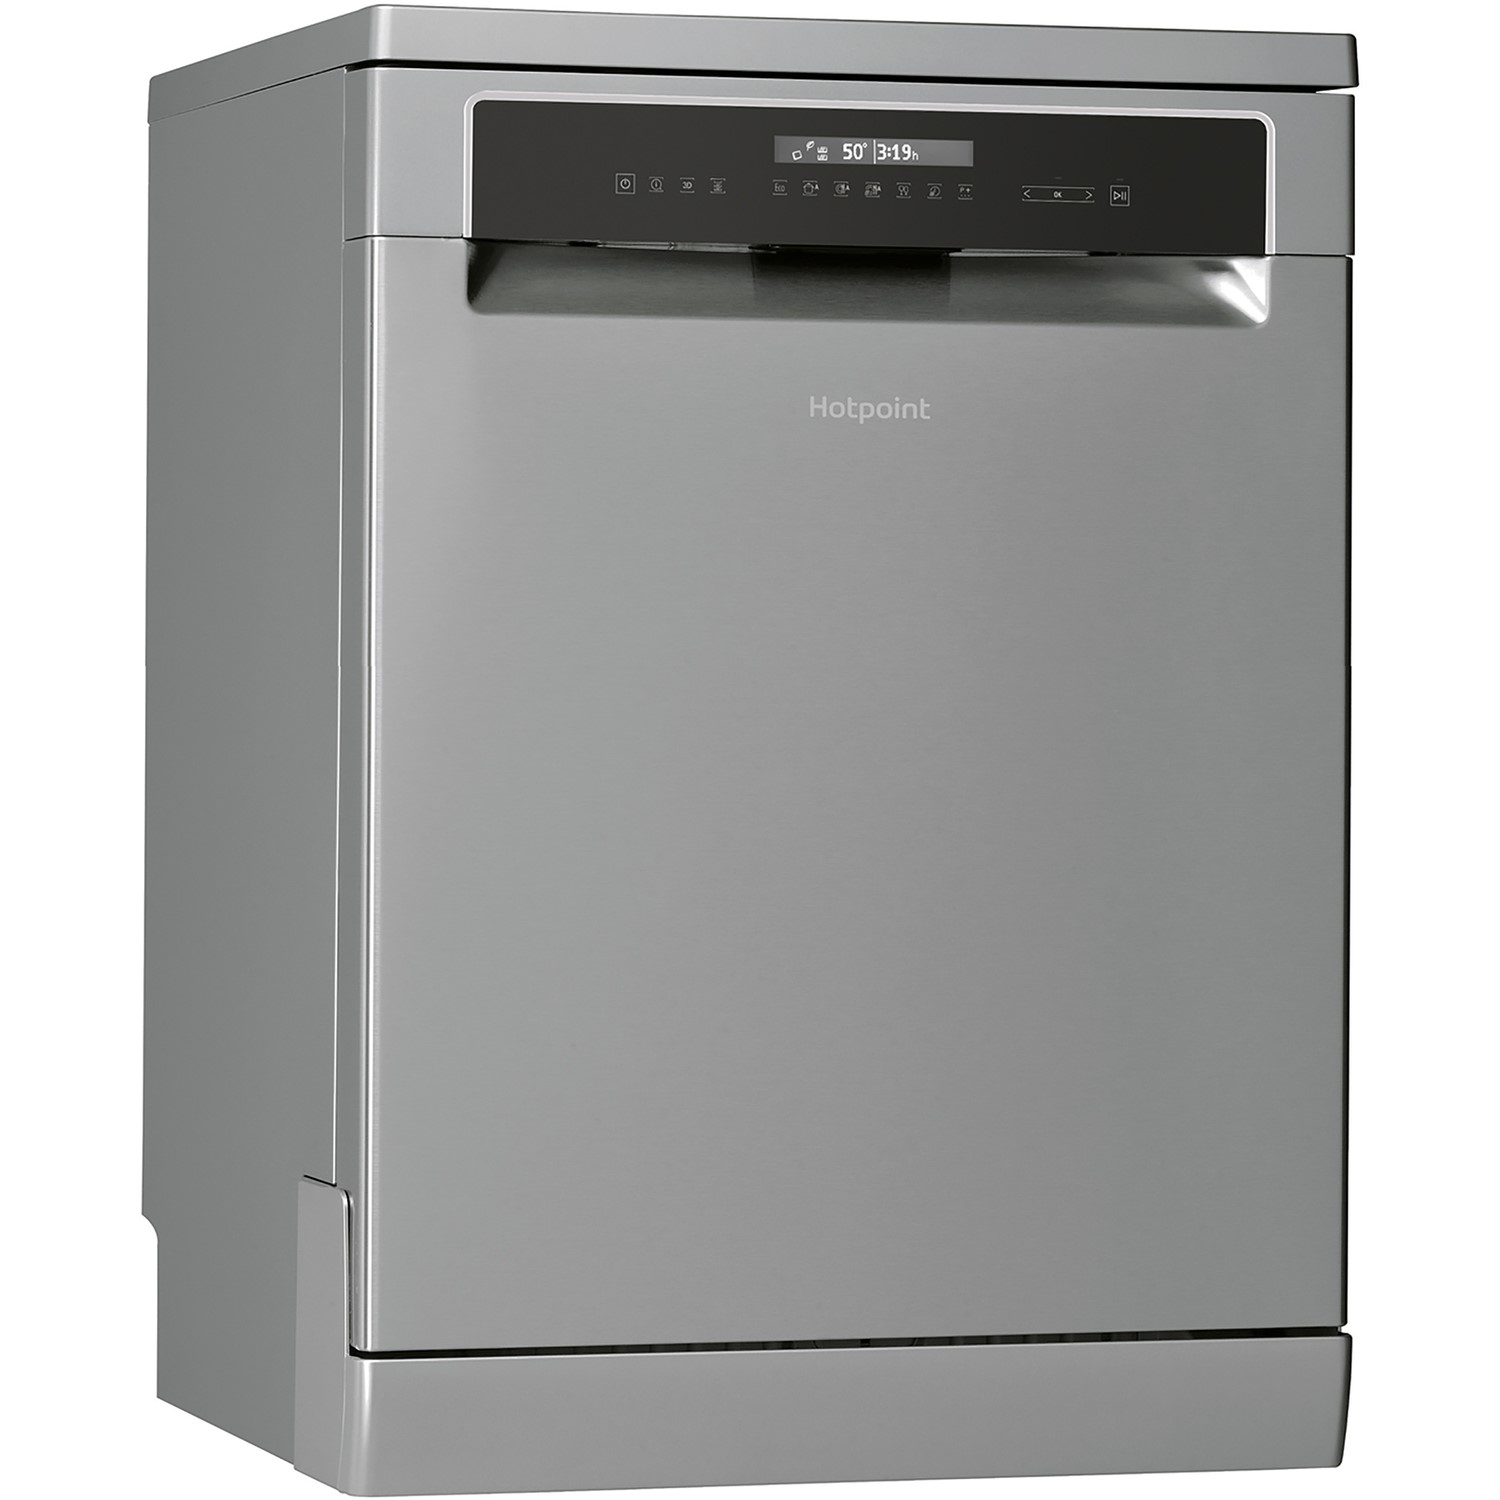 Hotpoint HFP5O41WLGXUK Extra Efficient 14 Place Freestanding Dishwasher - Stainless Steel